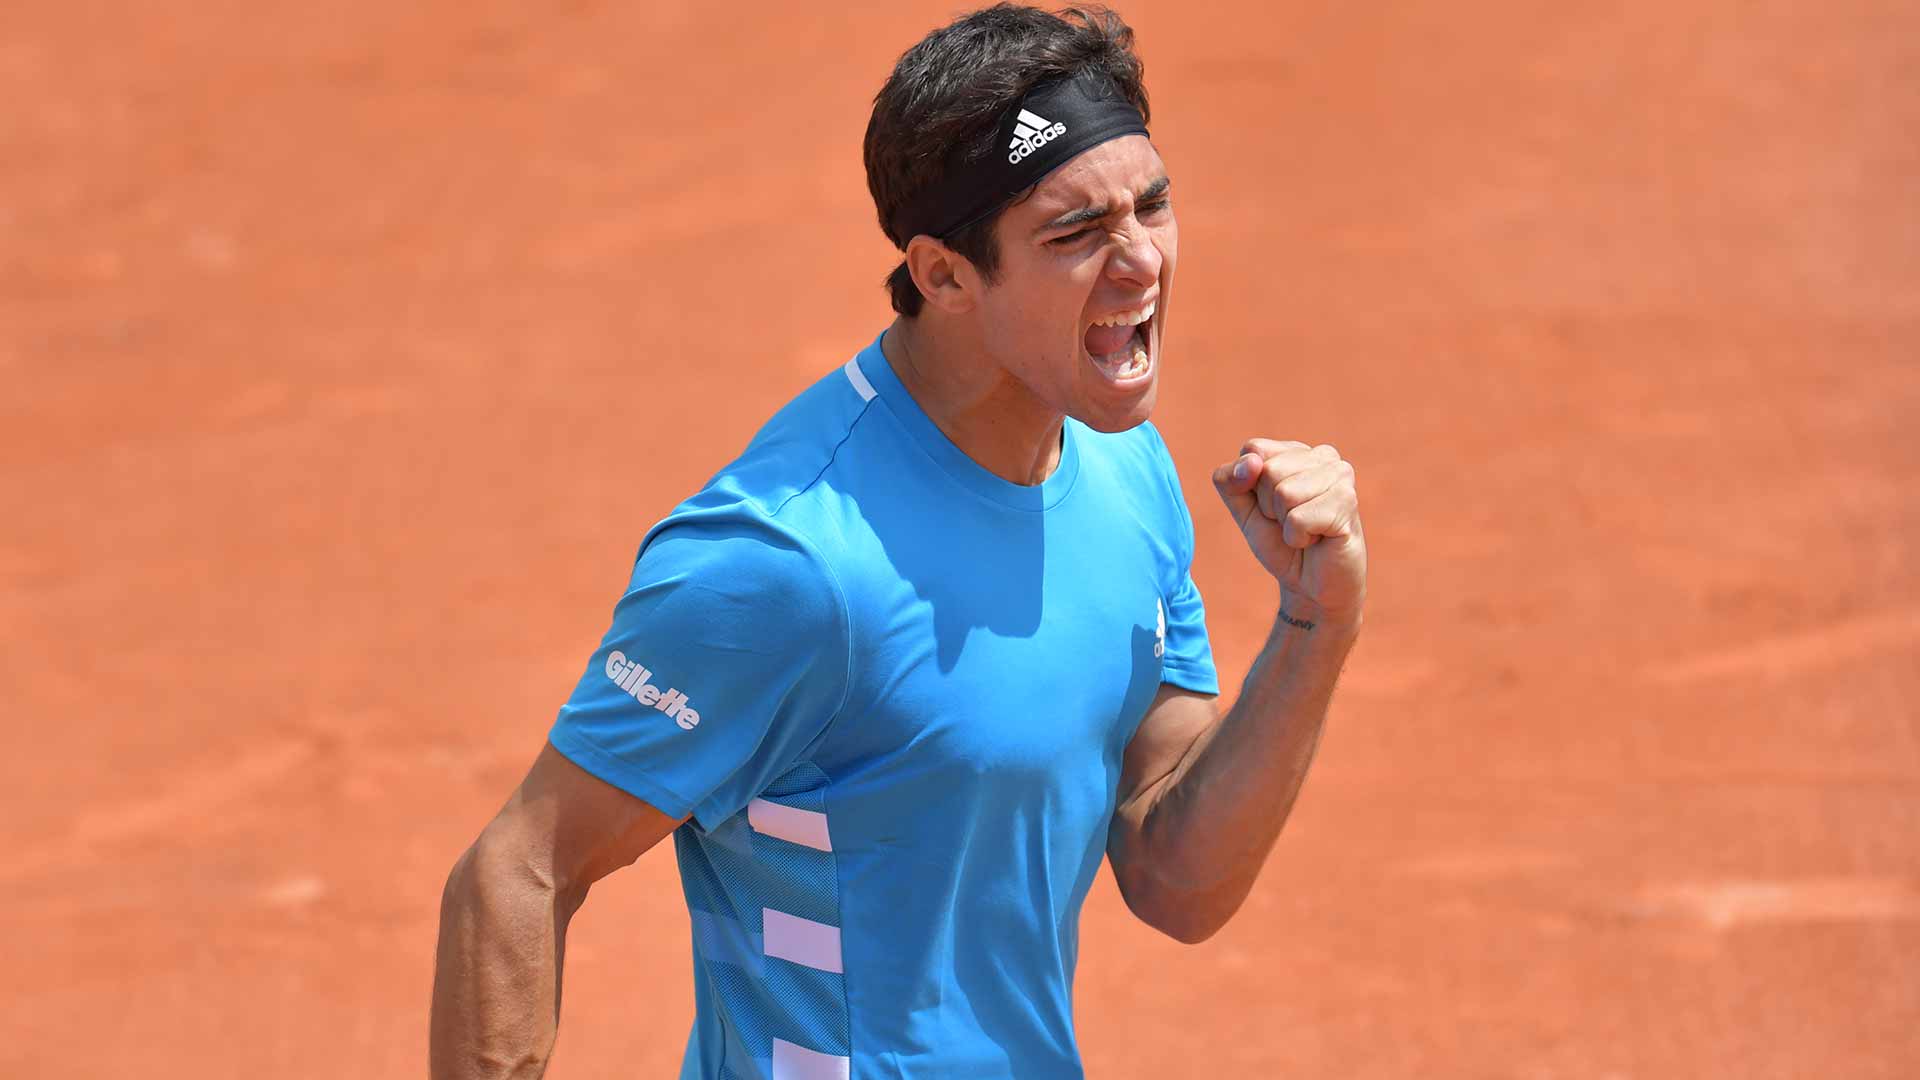 Chile's Cristian Garin wins his first Grand Slam match on Monday at Roland Garros.